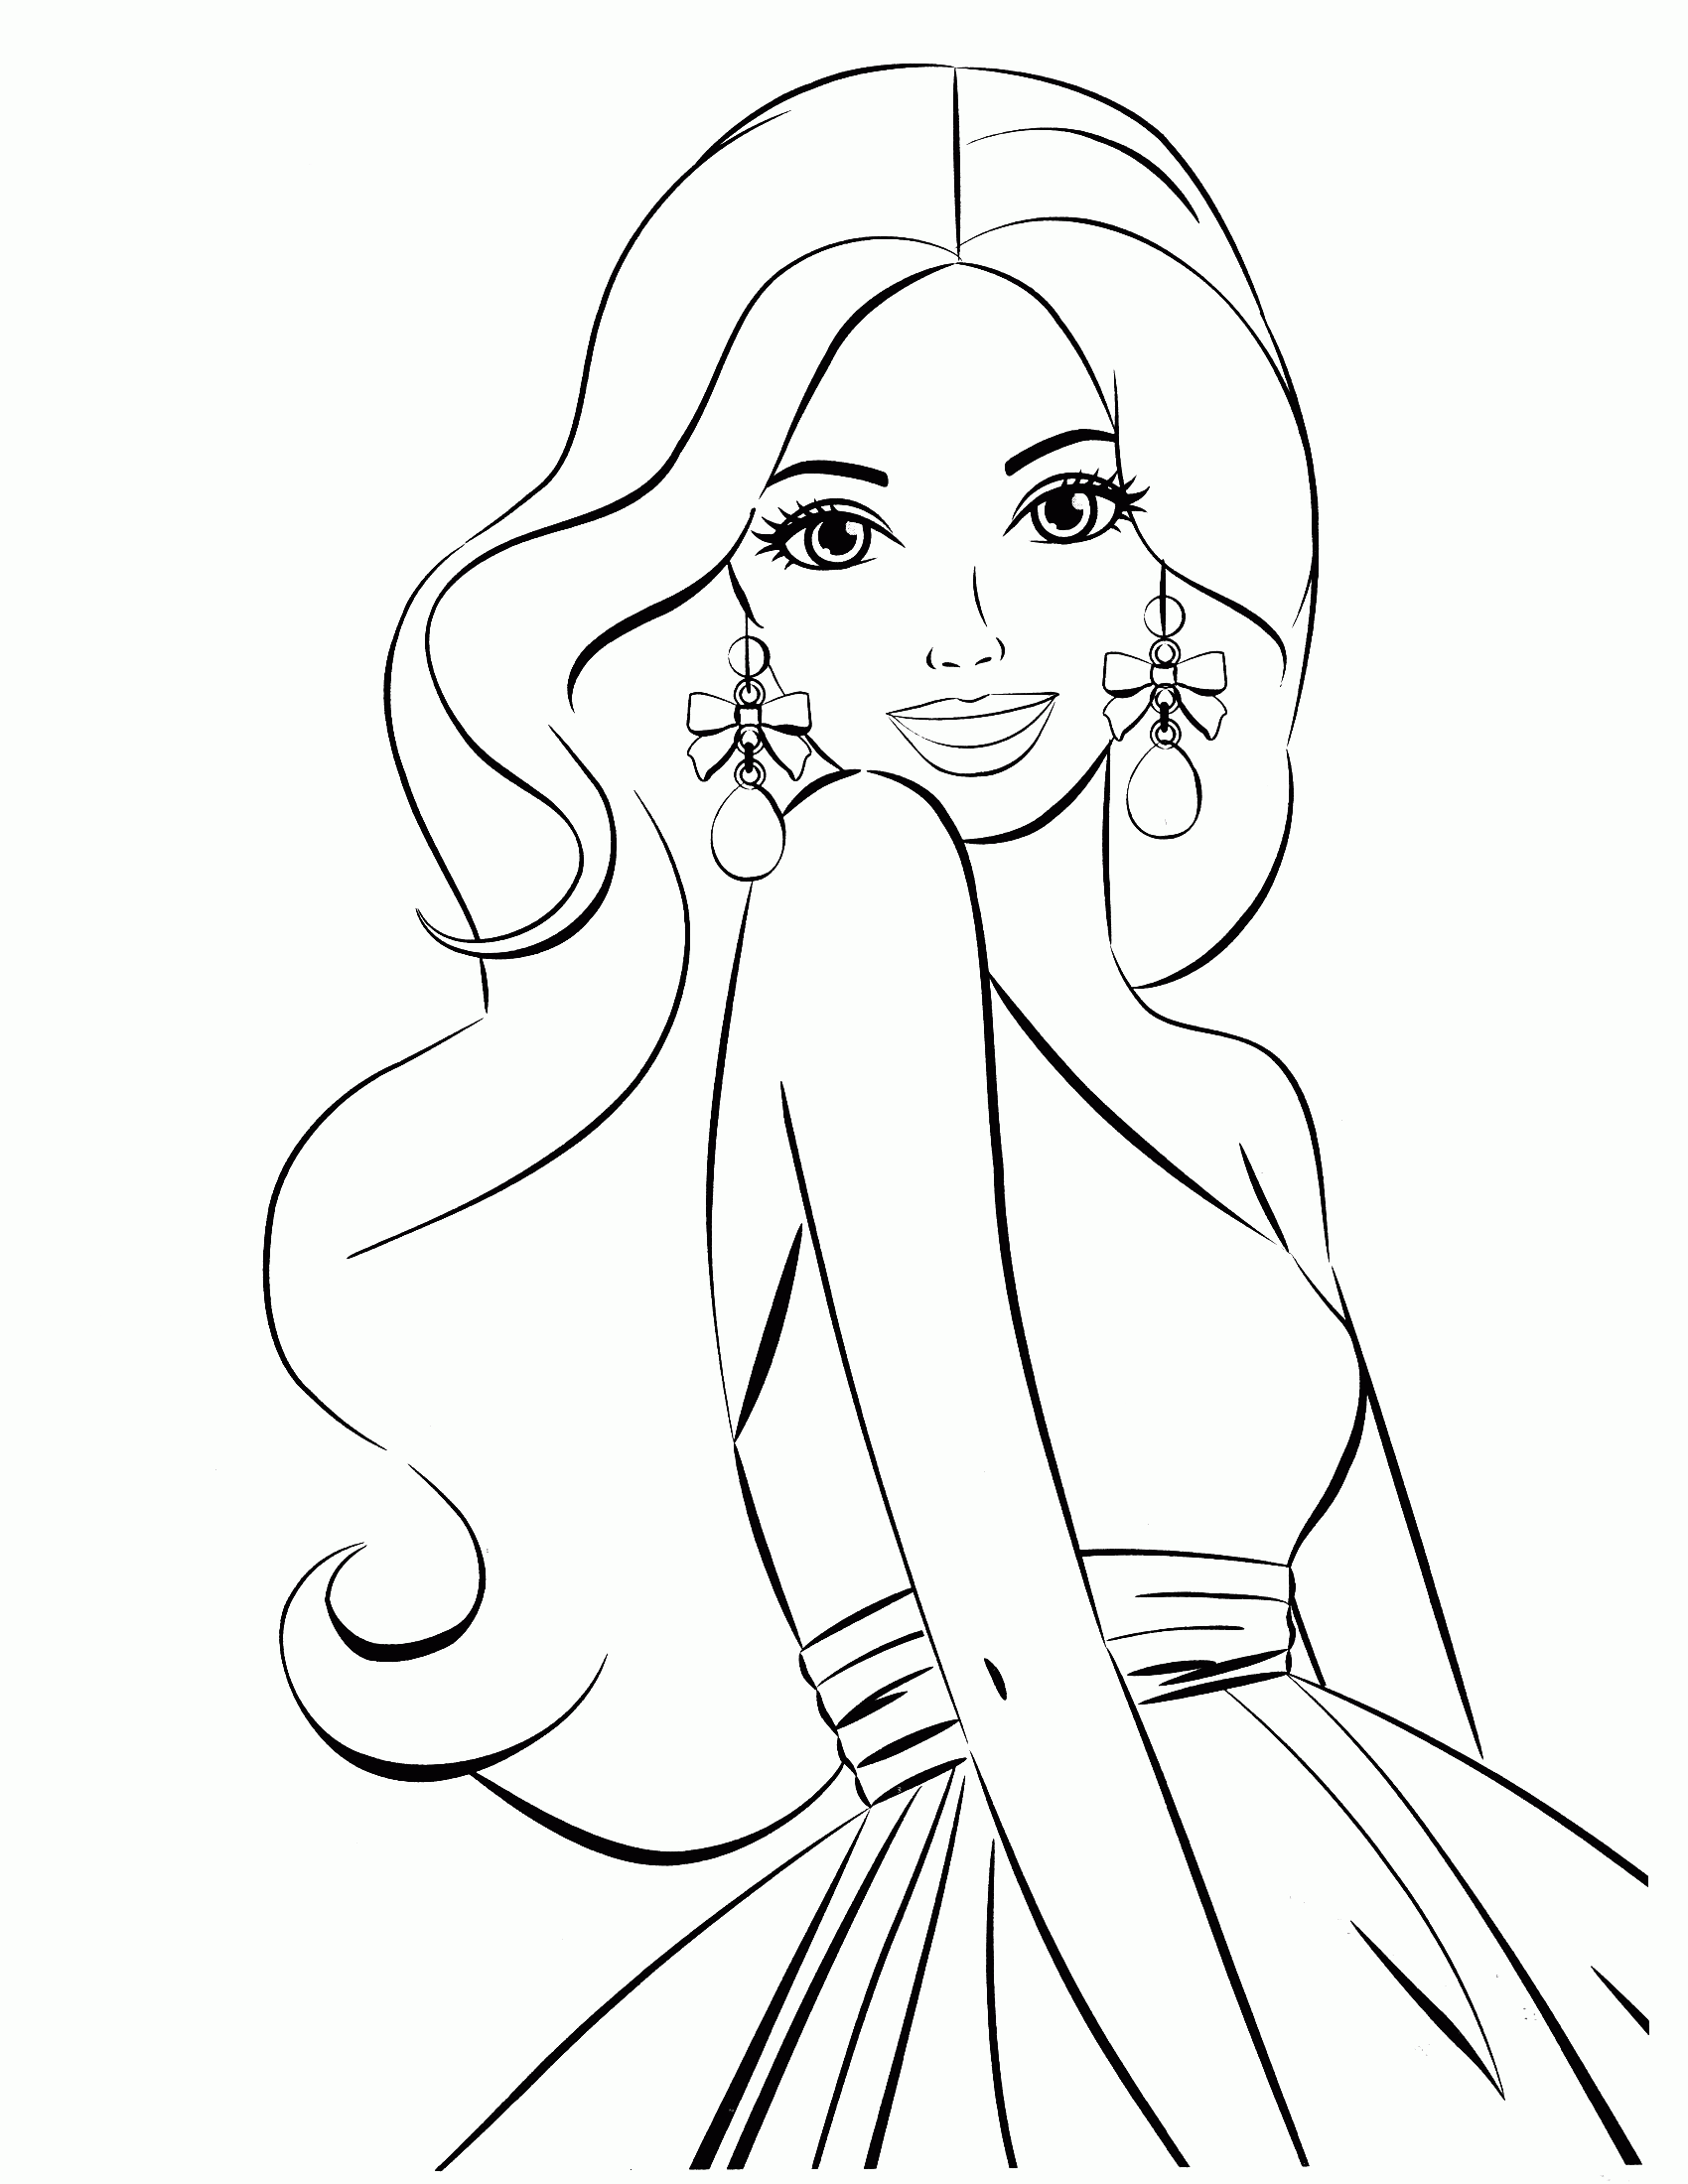 Barbie Coloring Pages Pdf   Coloring Home